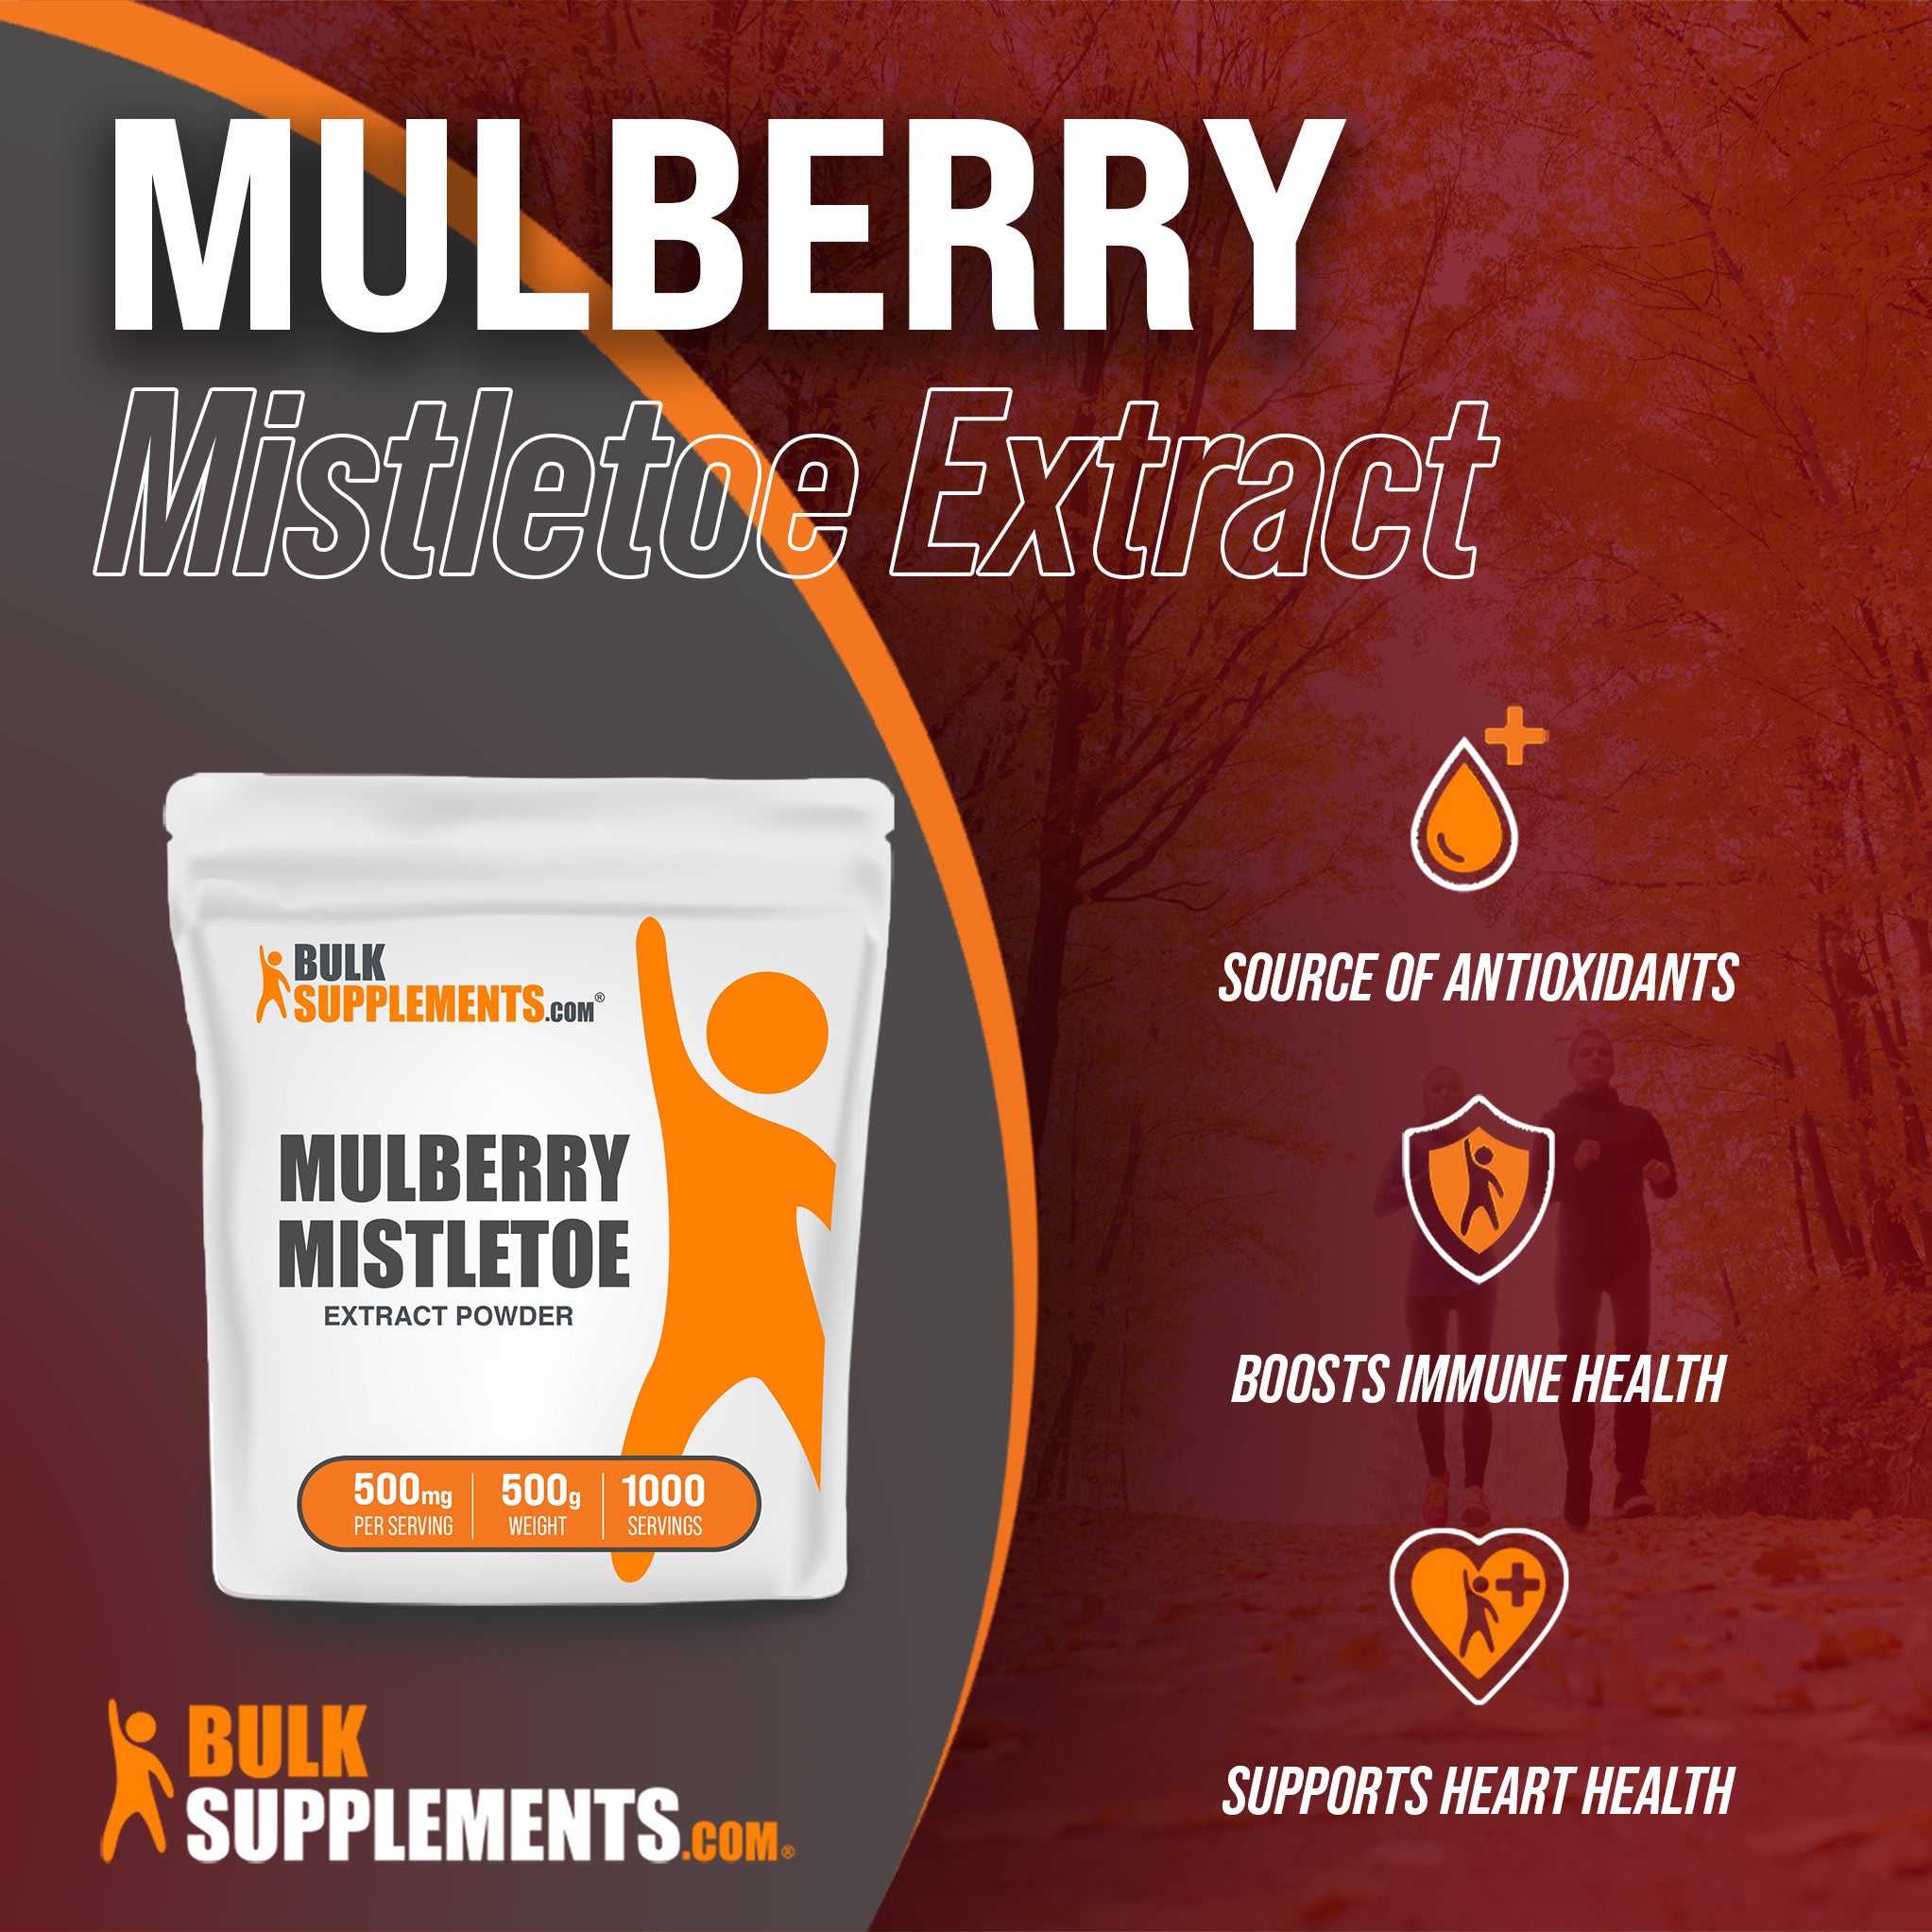 Benefits of Mulberry Mistletoe Extract: source of antioxidants, boosts immune health, supports heart health